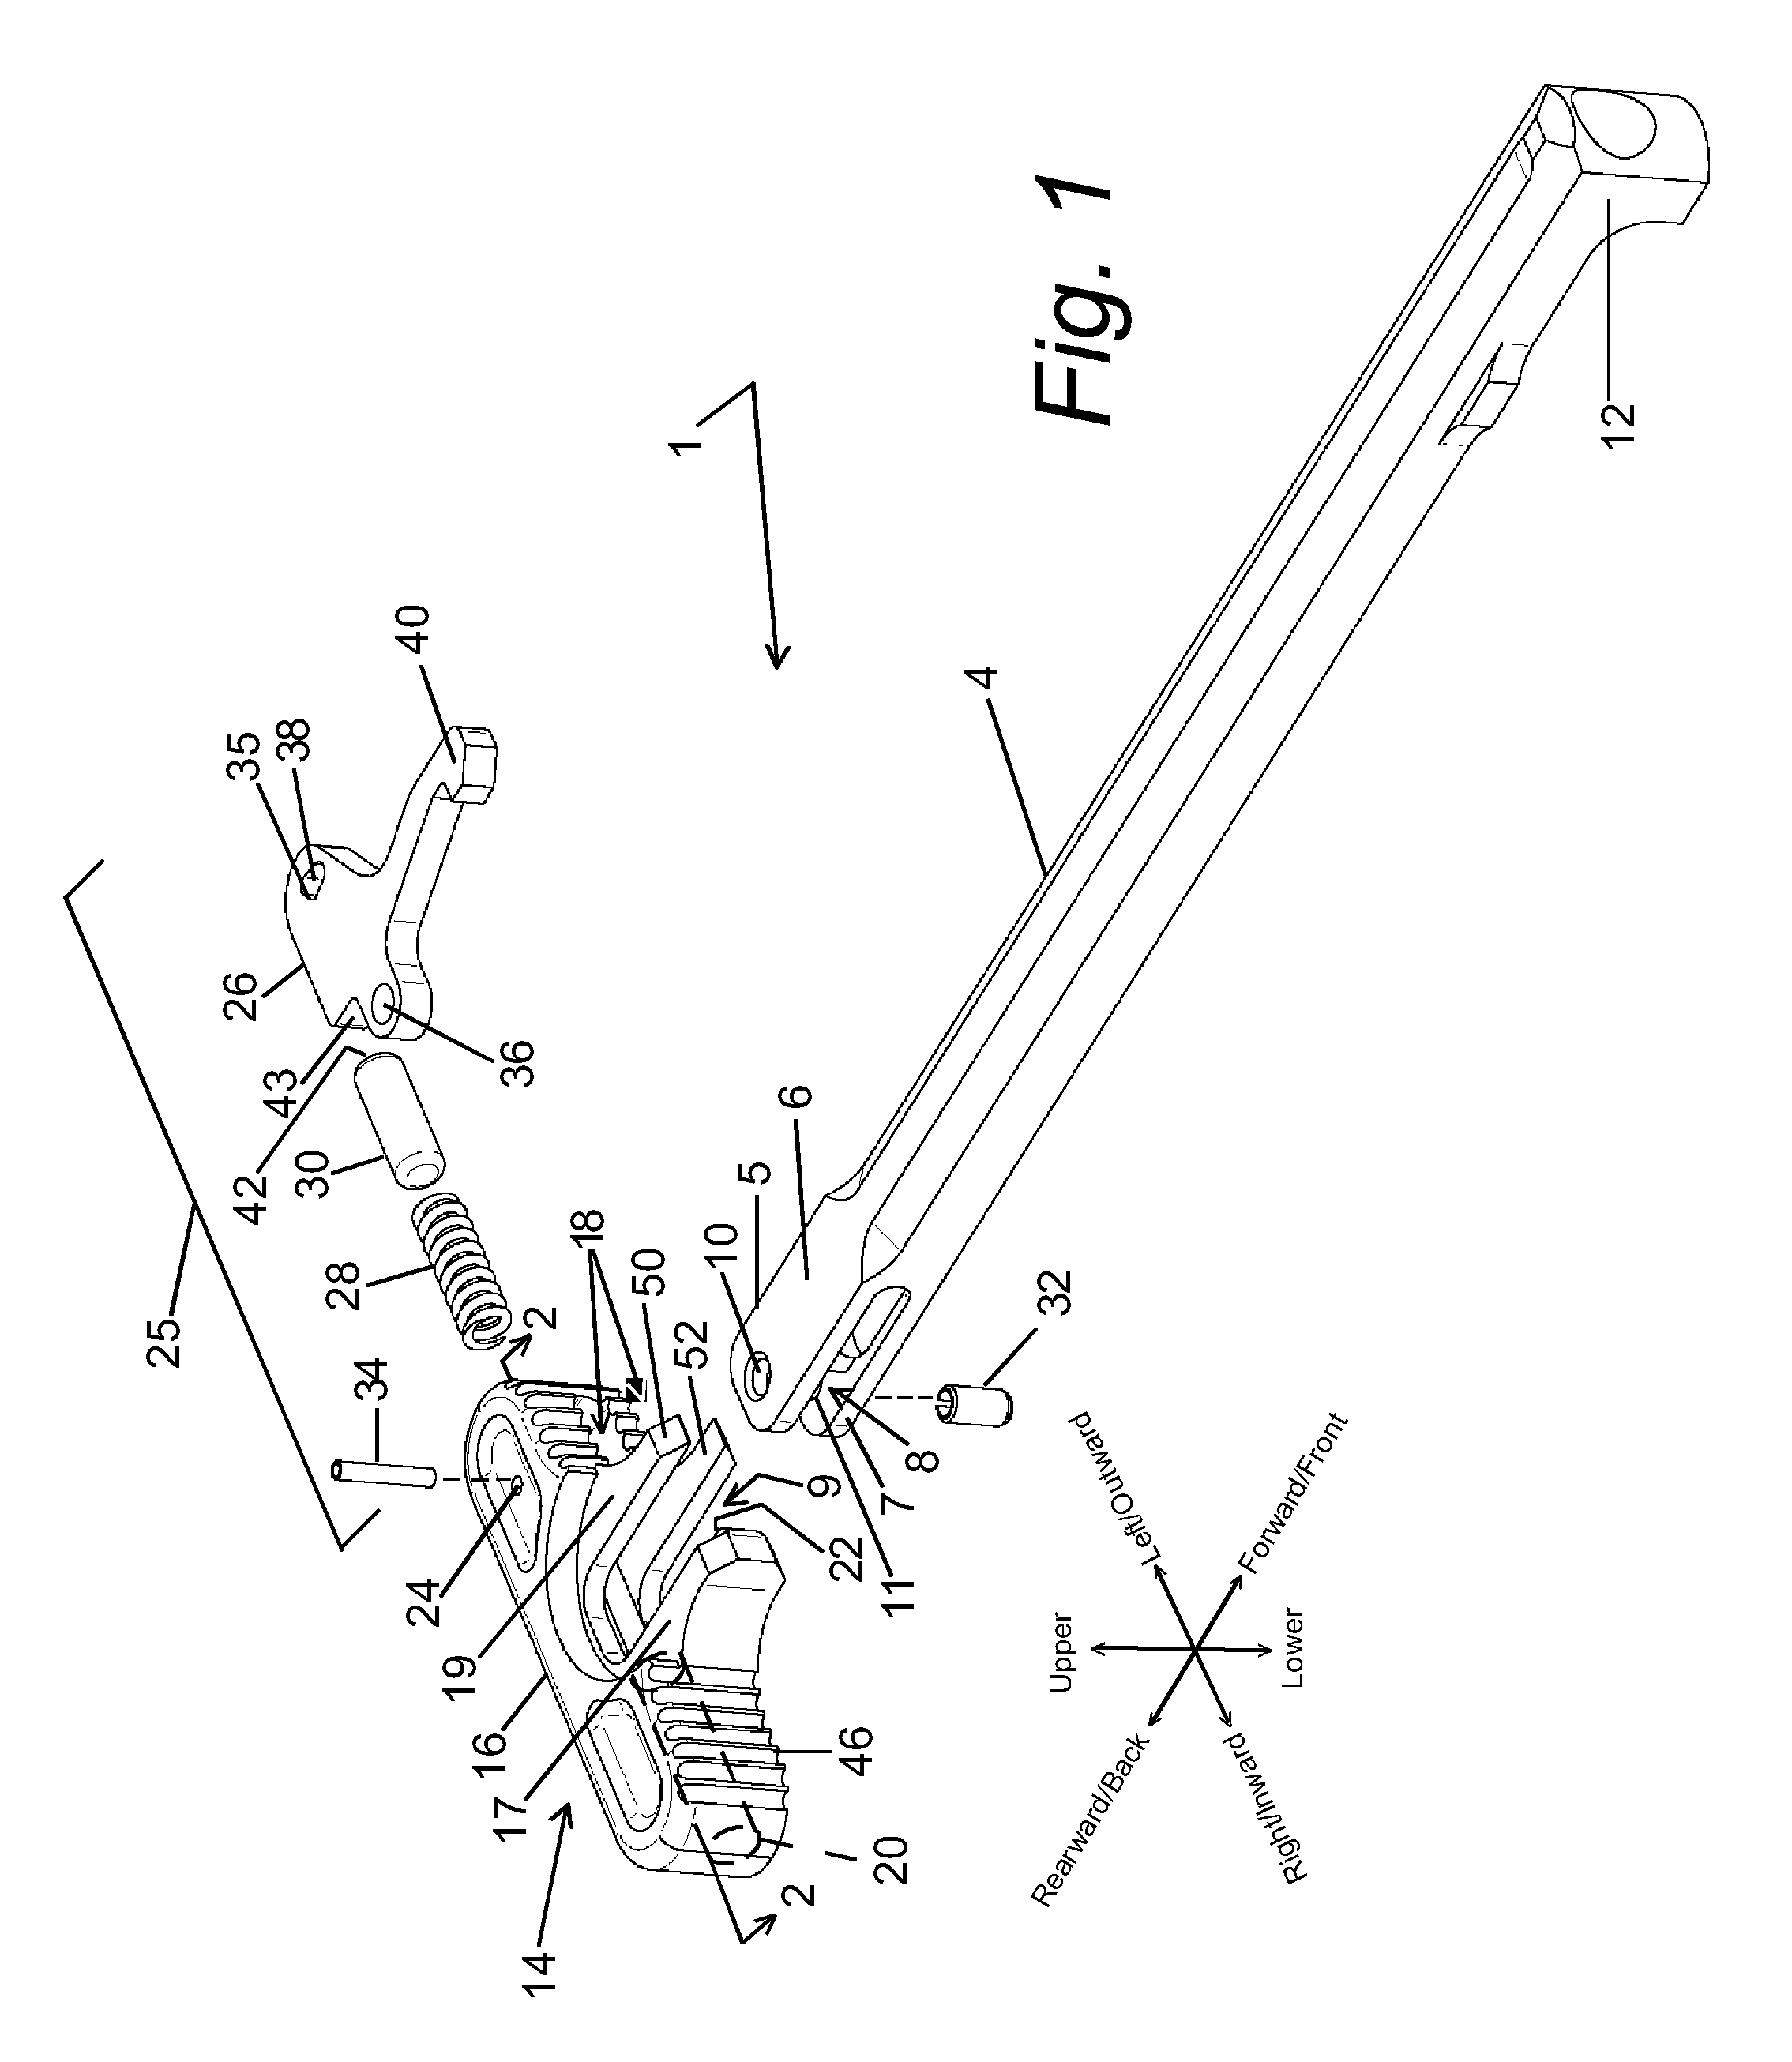 Ambidextrous charging handle for firearm